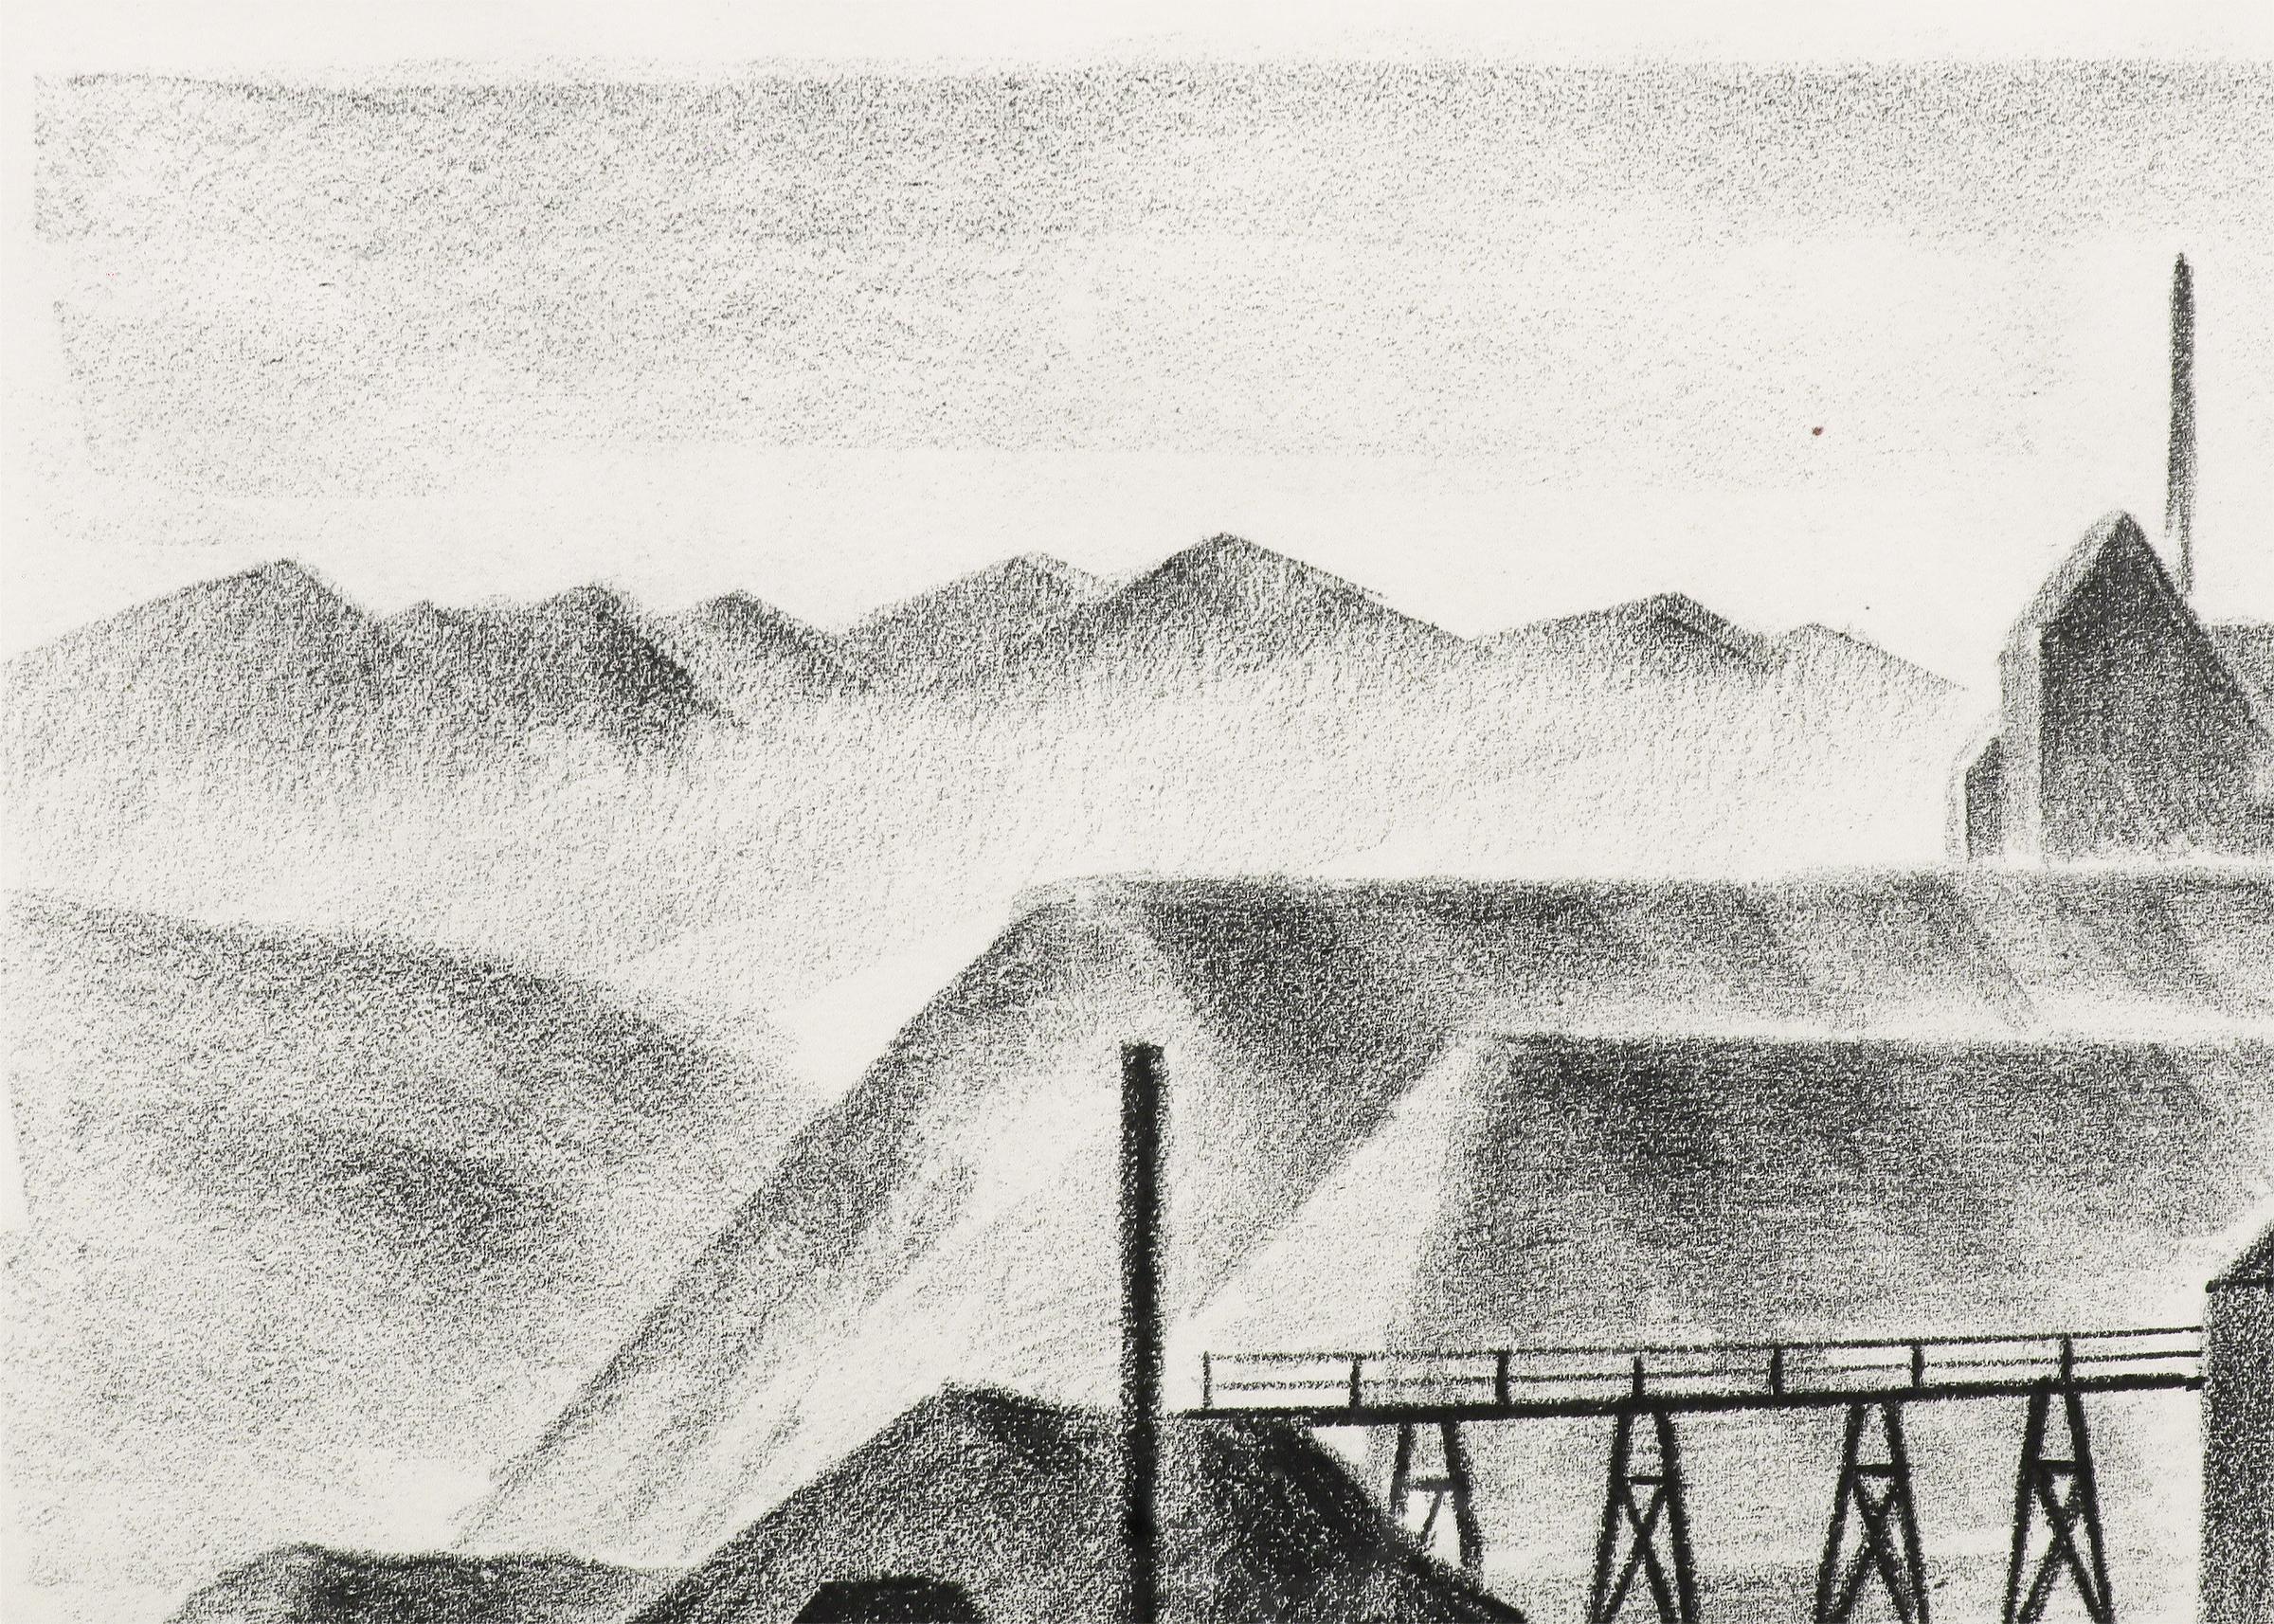 Lithograph on paper titled 'Silver Mine, Russell Gulch (12/25)' by Arnold Ronnebeck, which is a black and white lithograph print of an oil painting by him of the same name. It shows a mine with a mountain ridge in the background. Presented in a